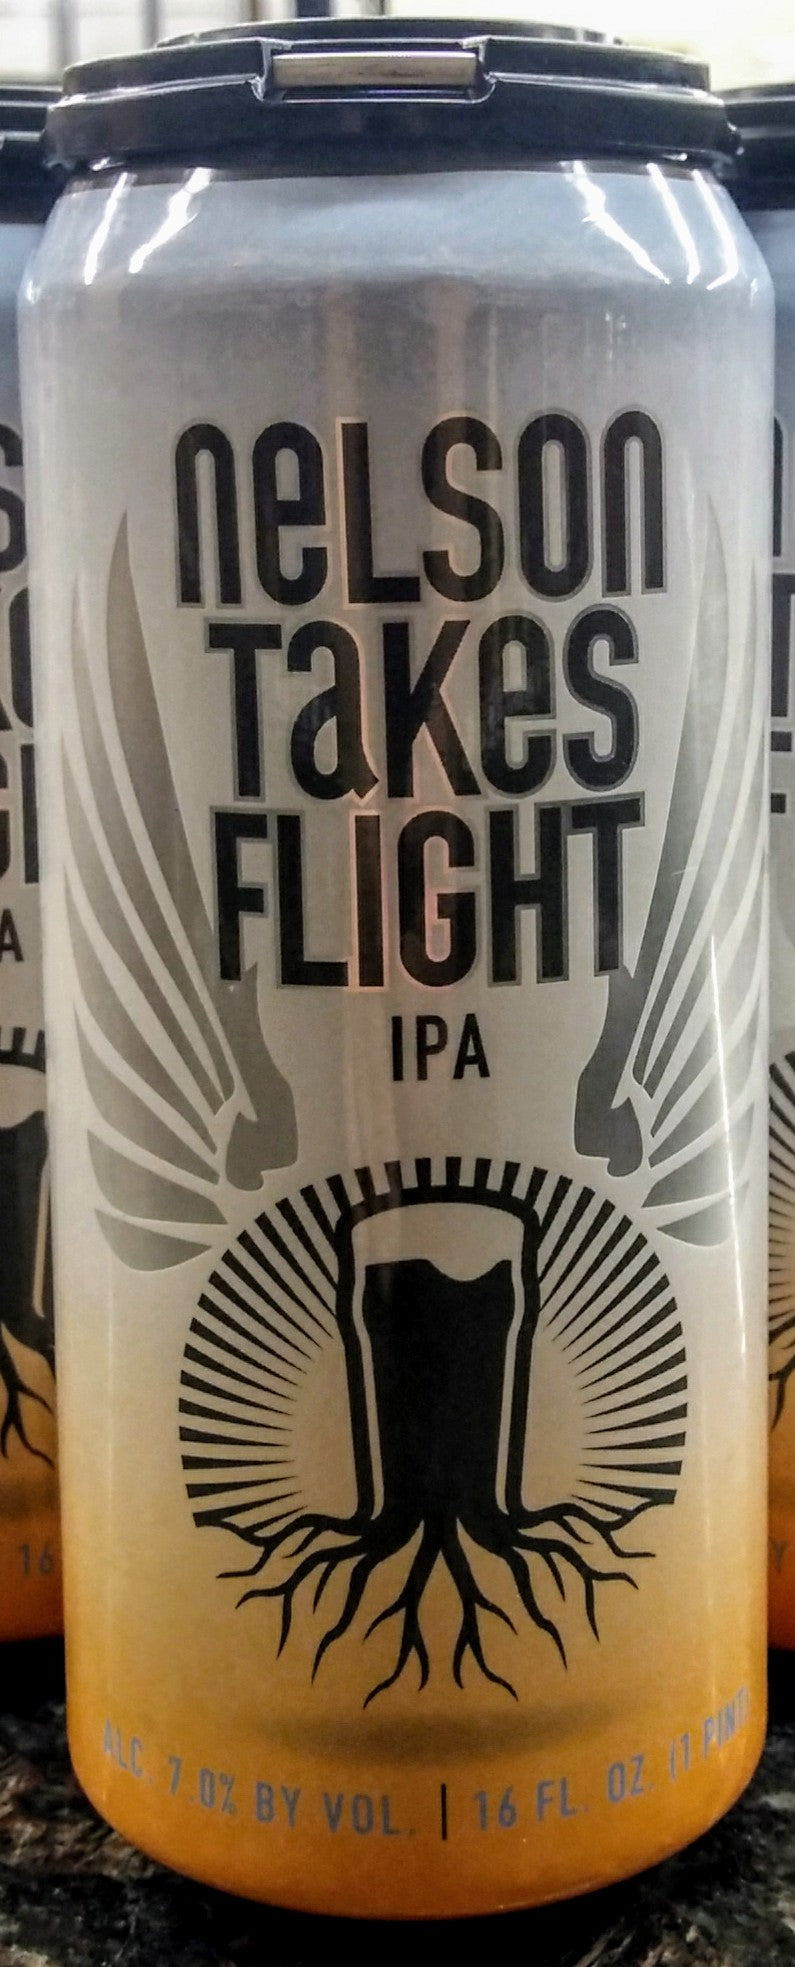 BURGEON BEER CO. NELSON TAKES FLIGHT IPA 16oz can